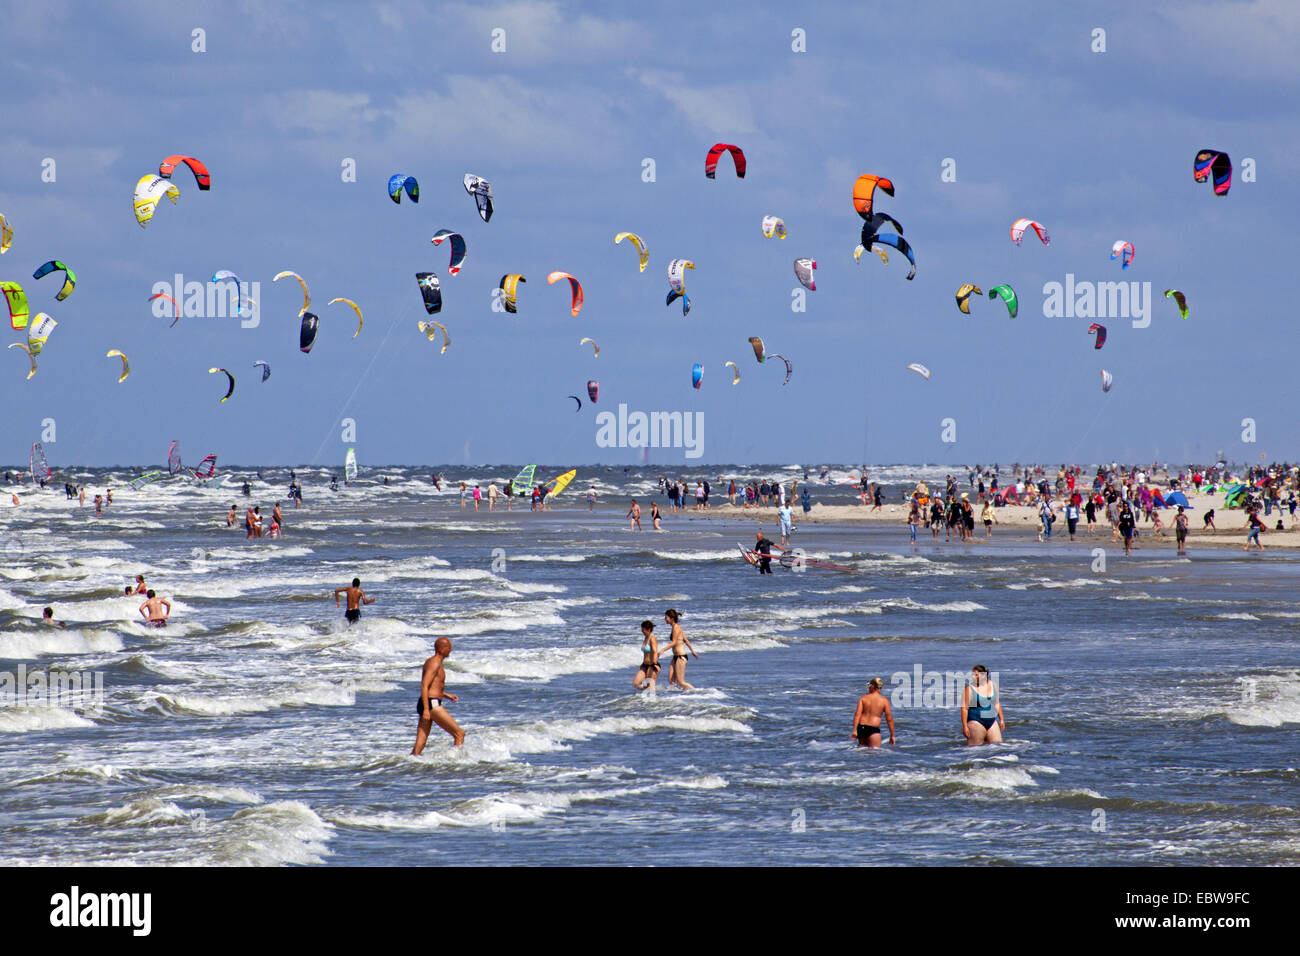 Kitesurf World Cup at the beach of St. Peter Ording, Germany, Schleswig-Holstein, St. Peter Ording Stock Photo